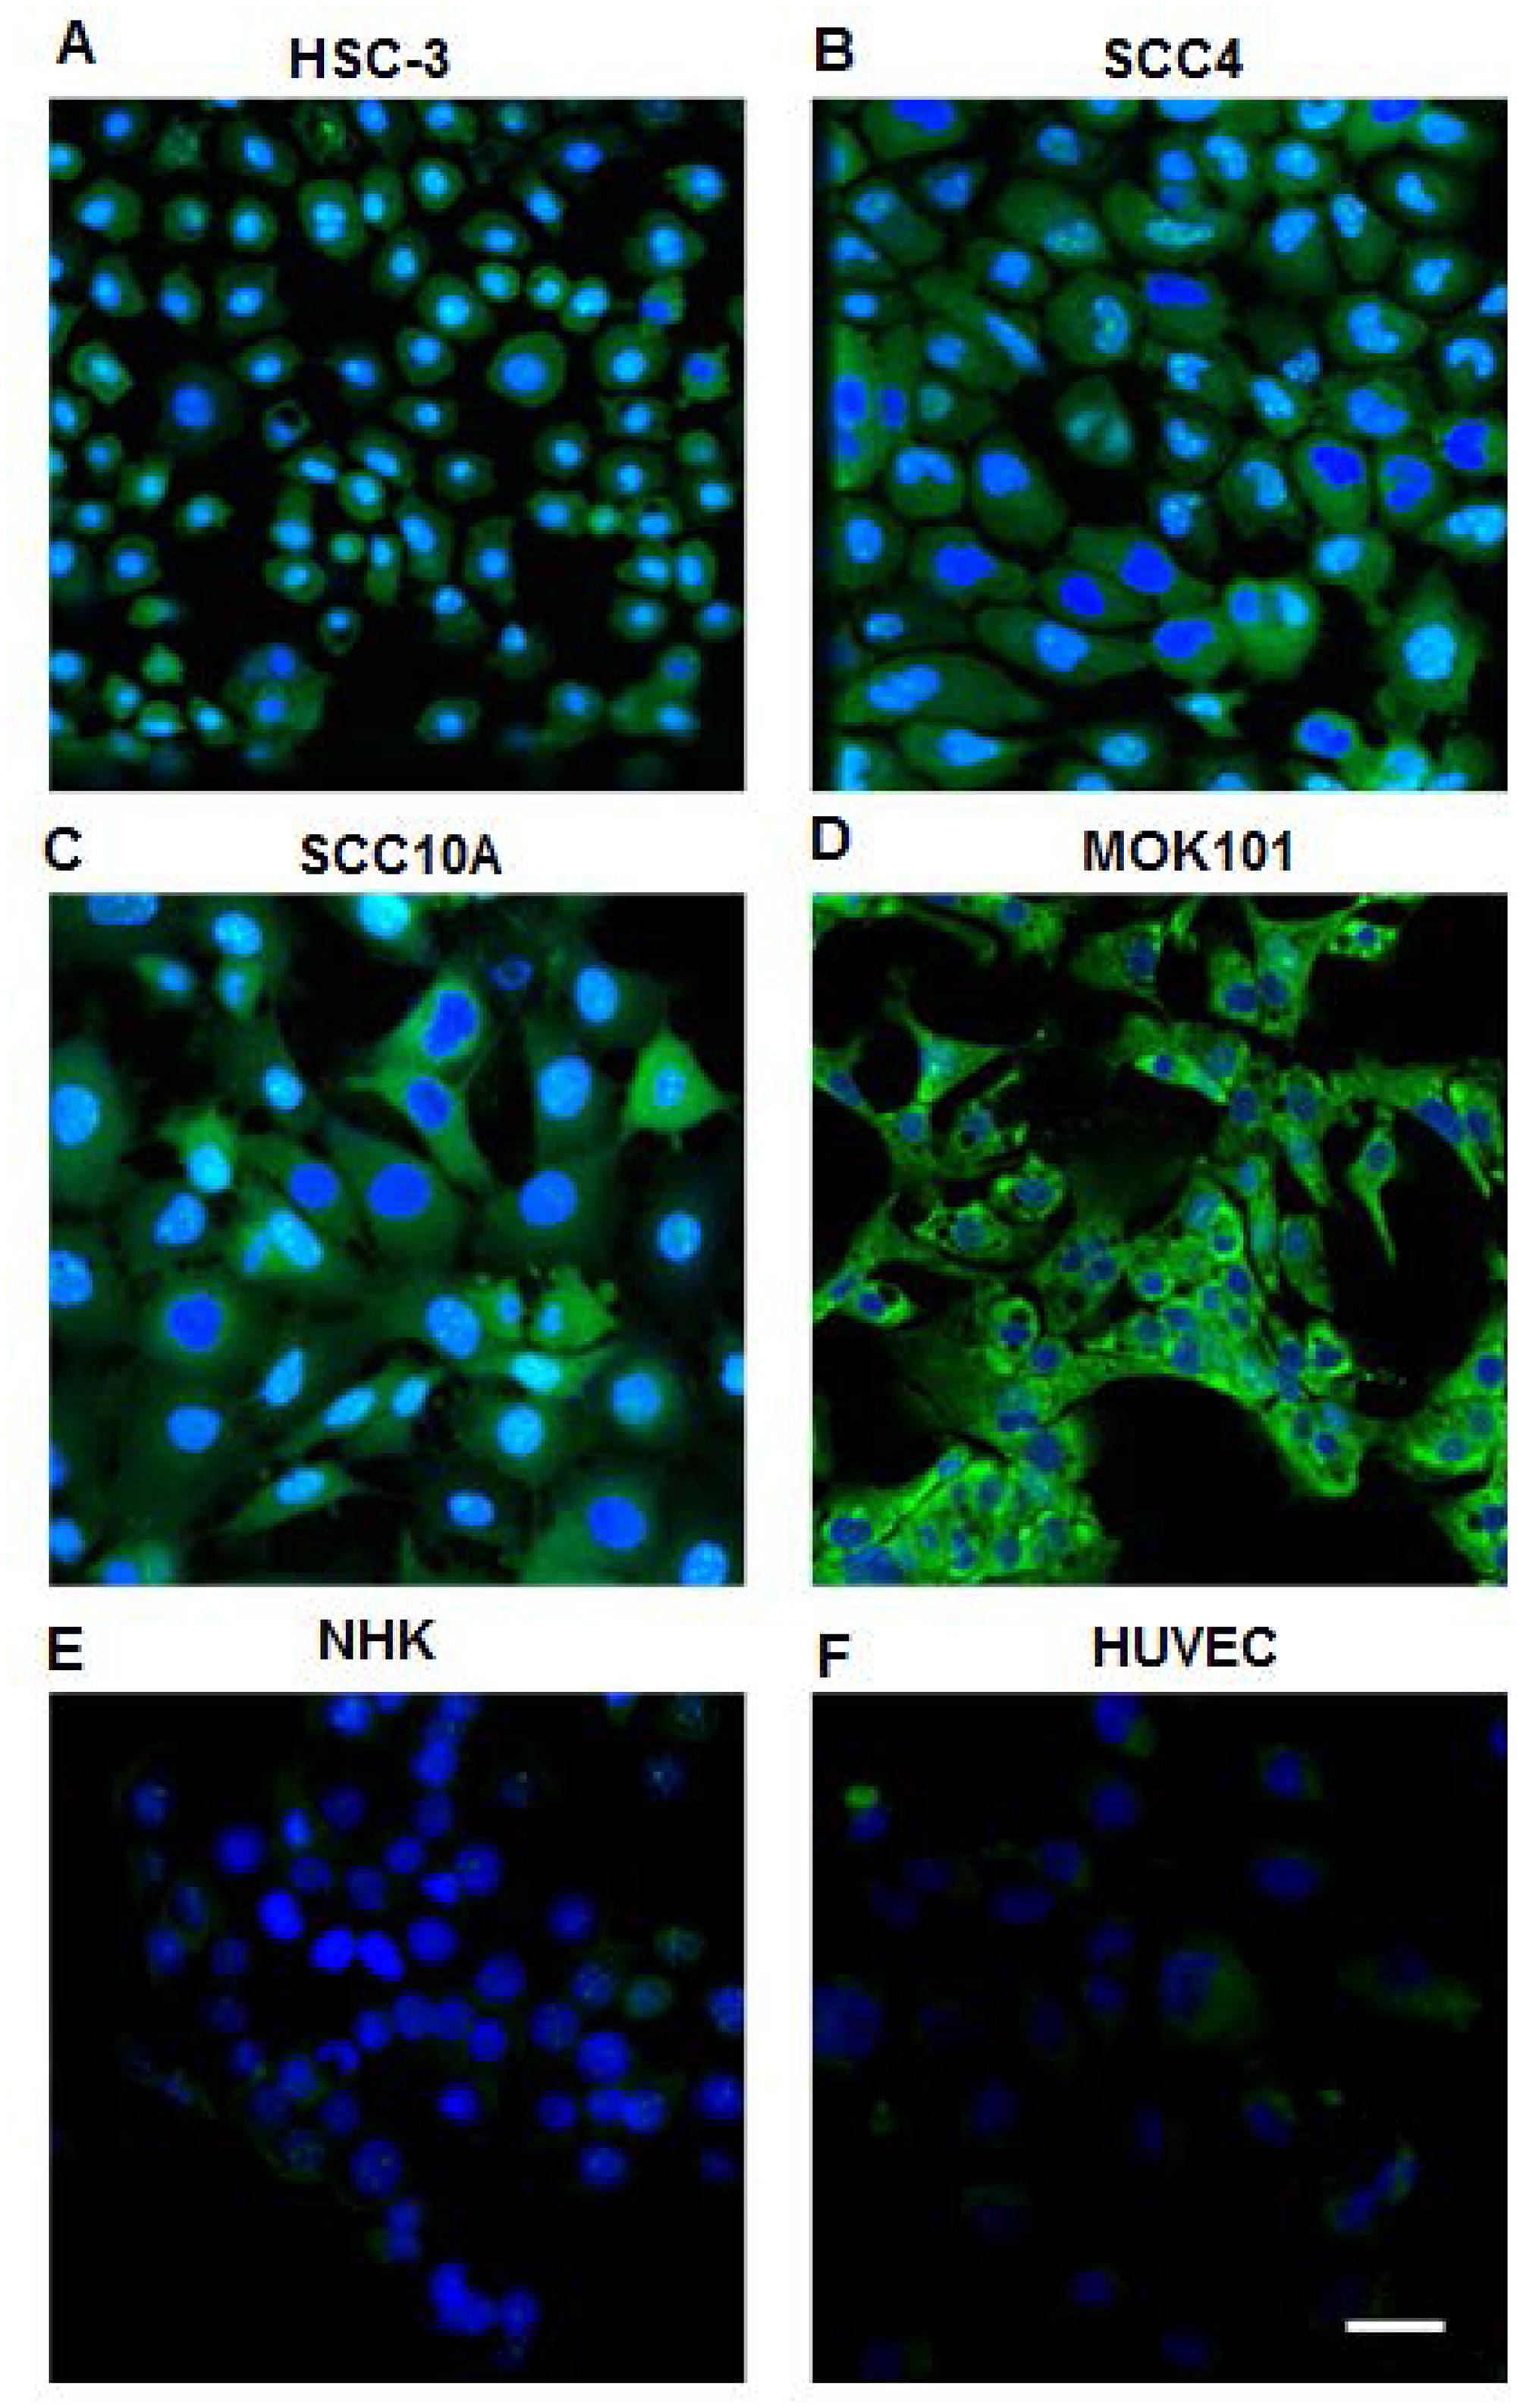 Confocal images of OSC cell lines and normal human cells stained by biotinylated LLY13/streptavidin-Alexa488.